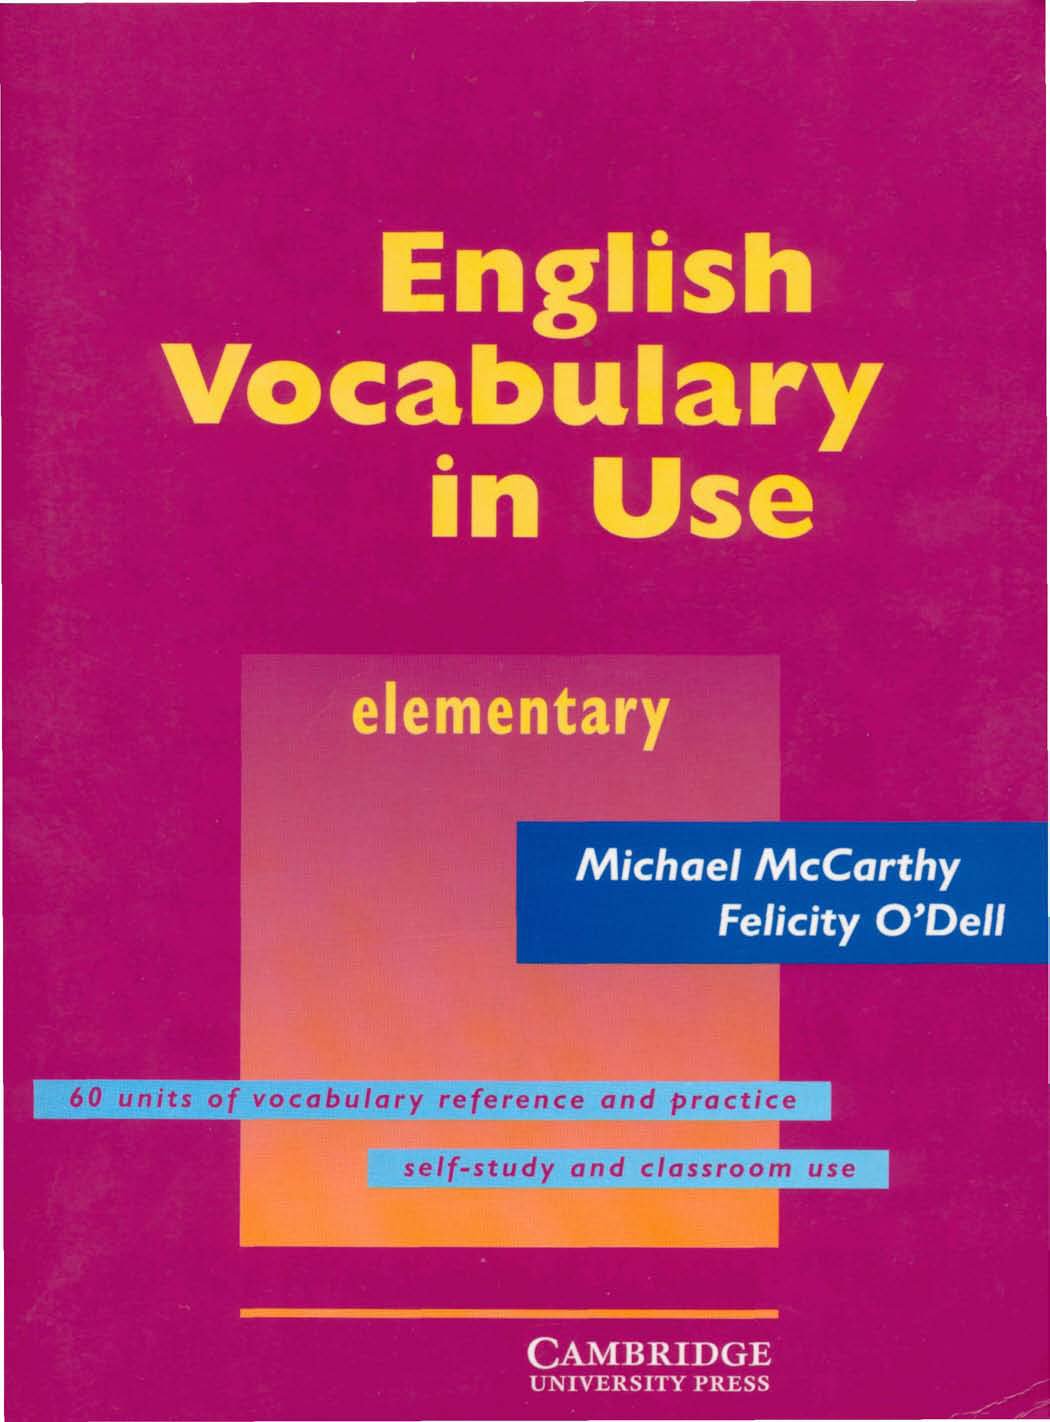 book-download-english-vocabulary-in-use-elementary